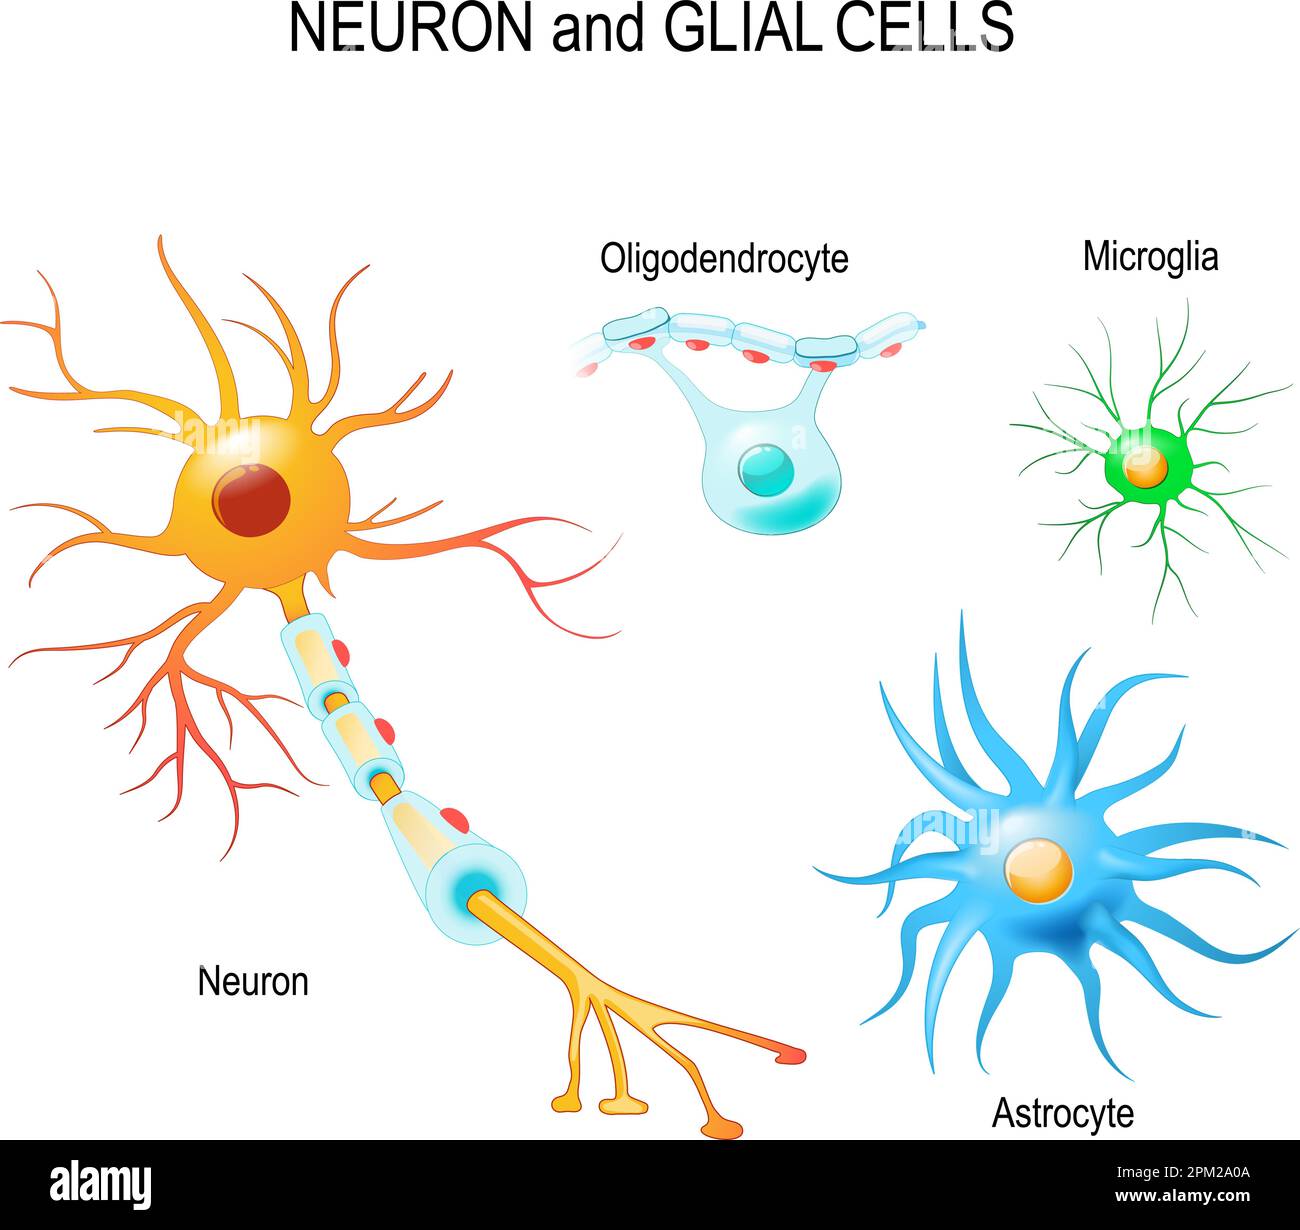 Cells of human's brain. Neuron and glial cells (Microglia, astrocyte and oligodendrocyte). Vector diagram for educational, medical, biological use Stock Vector